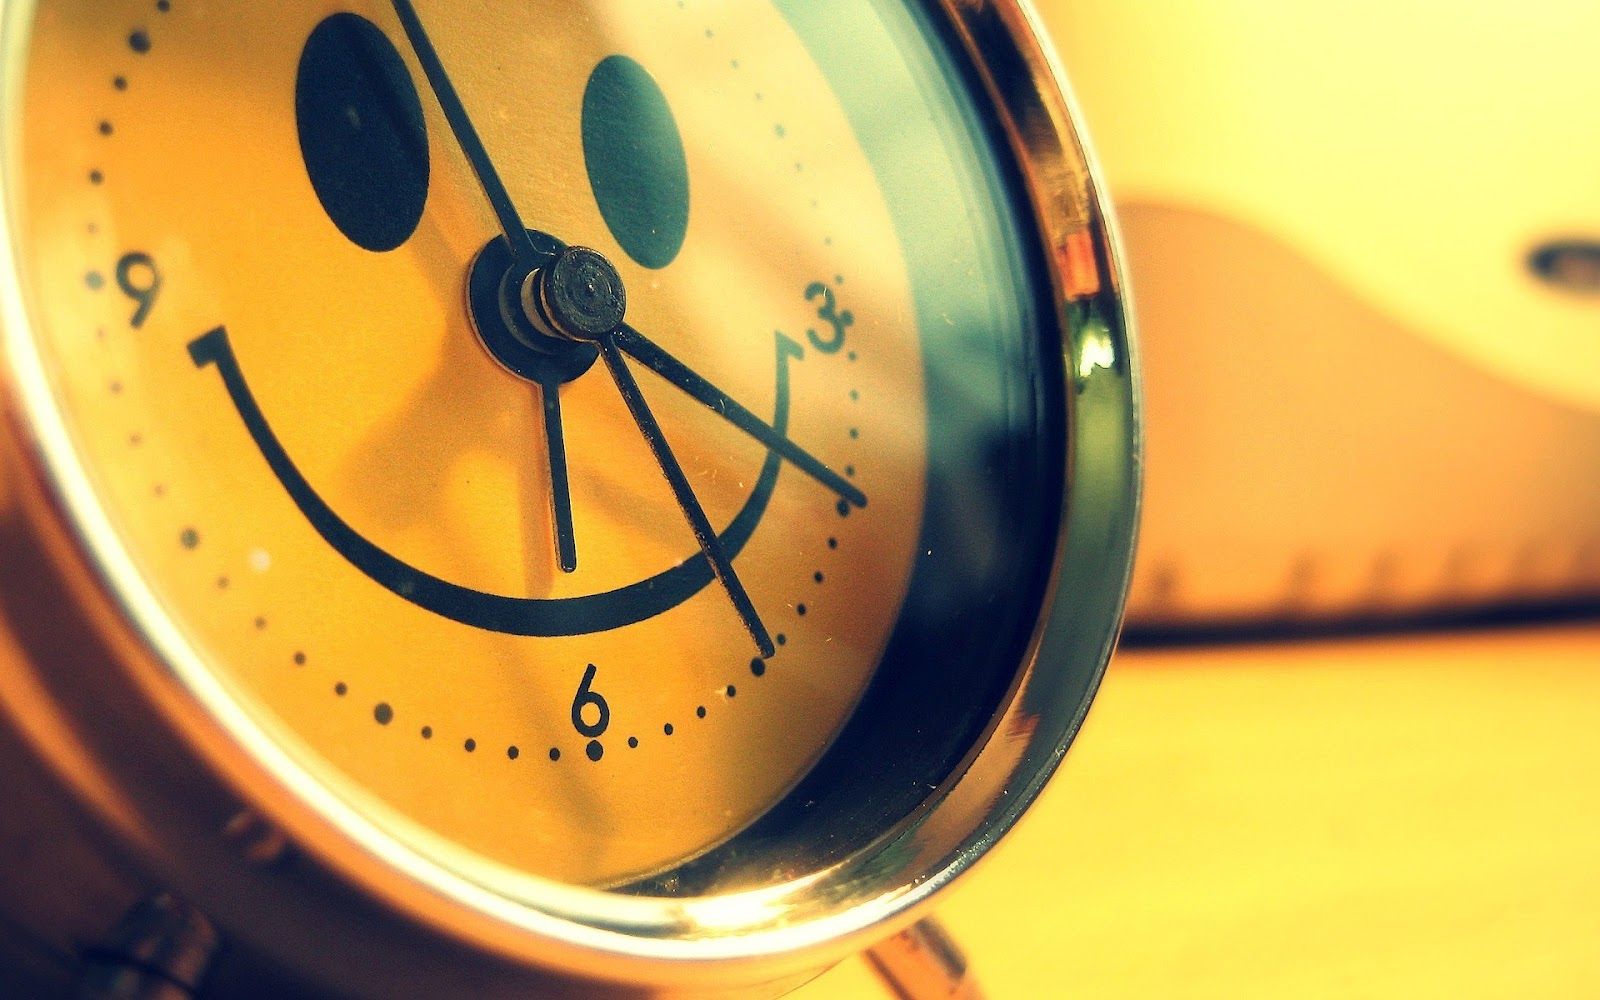 pic new posts: Hd Wallpaper Smiley Face